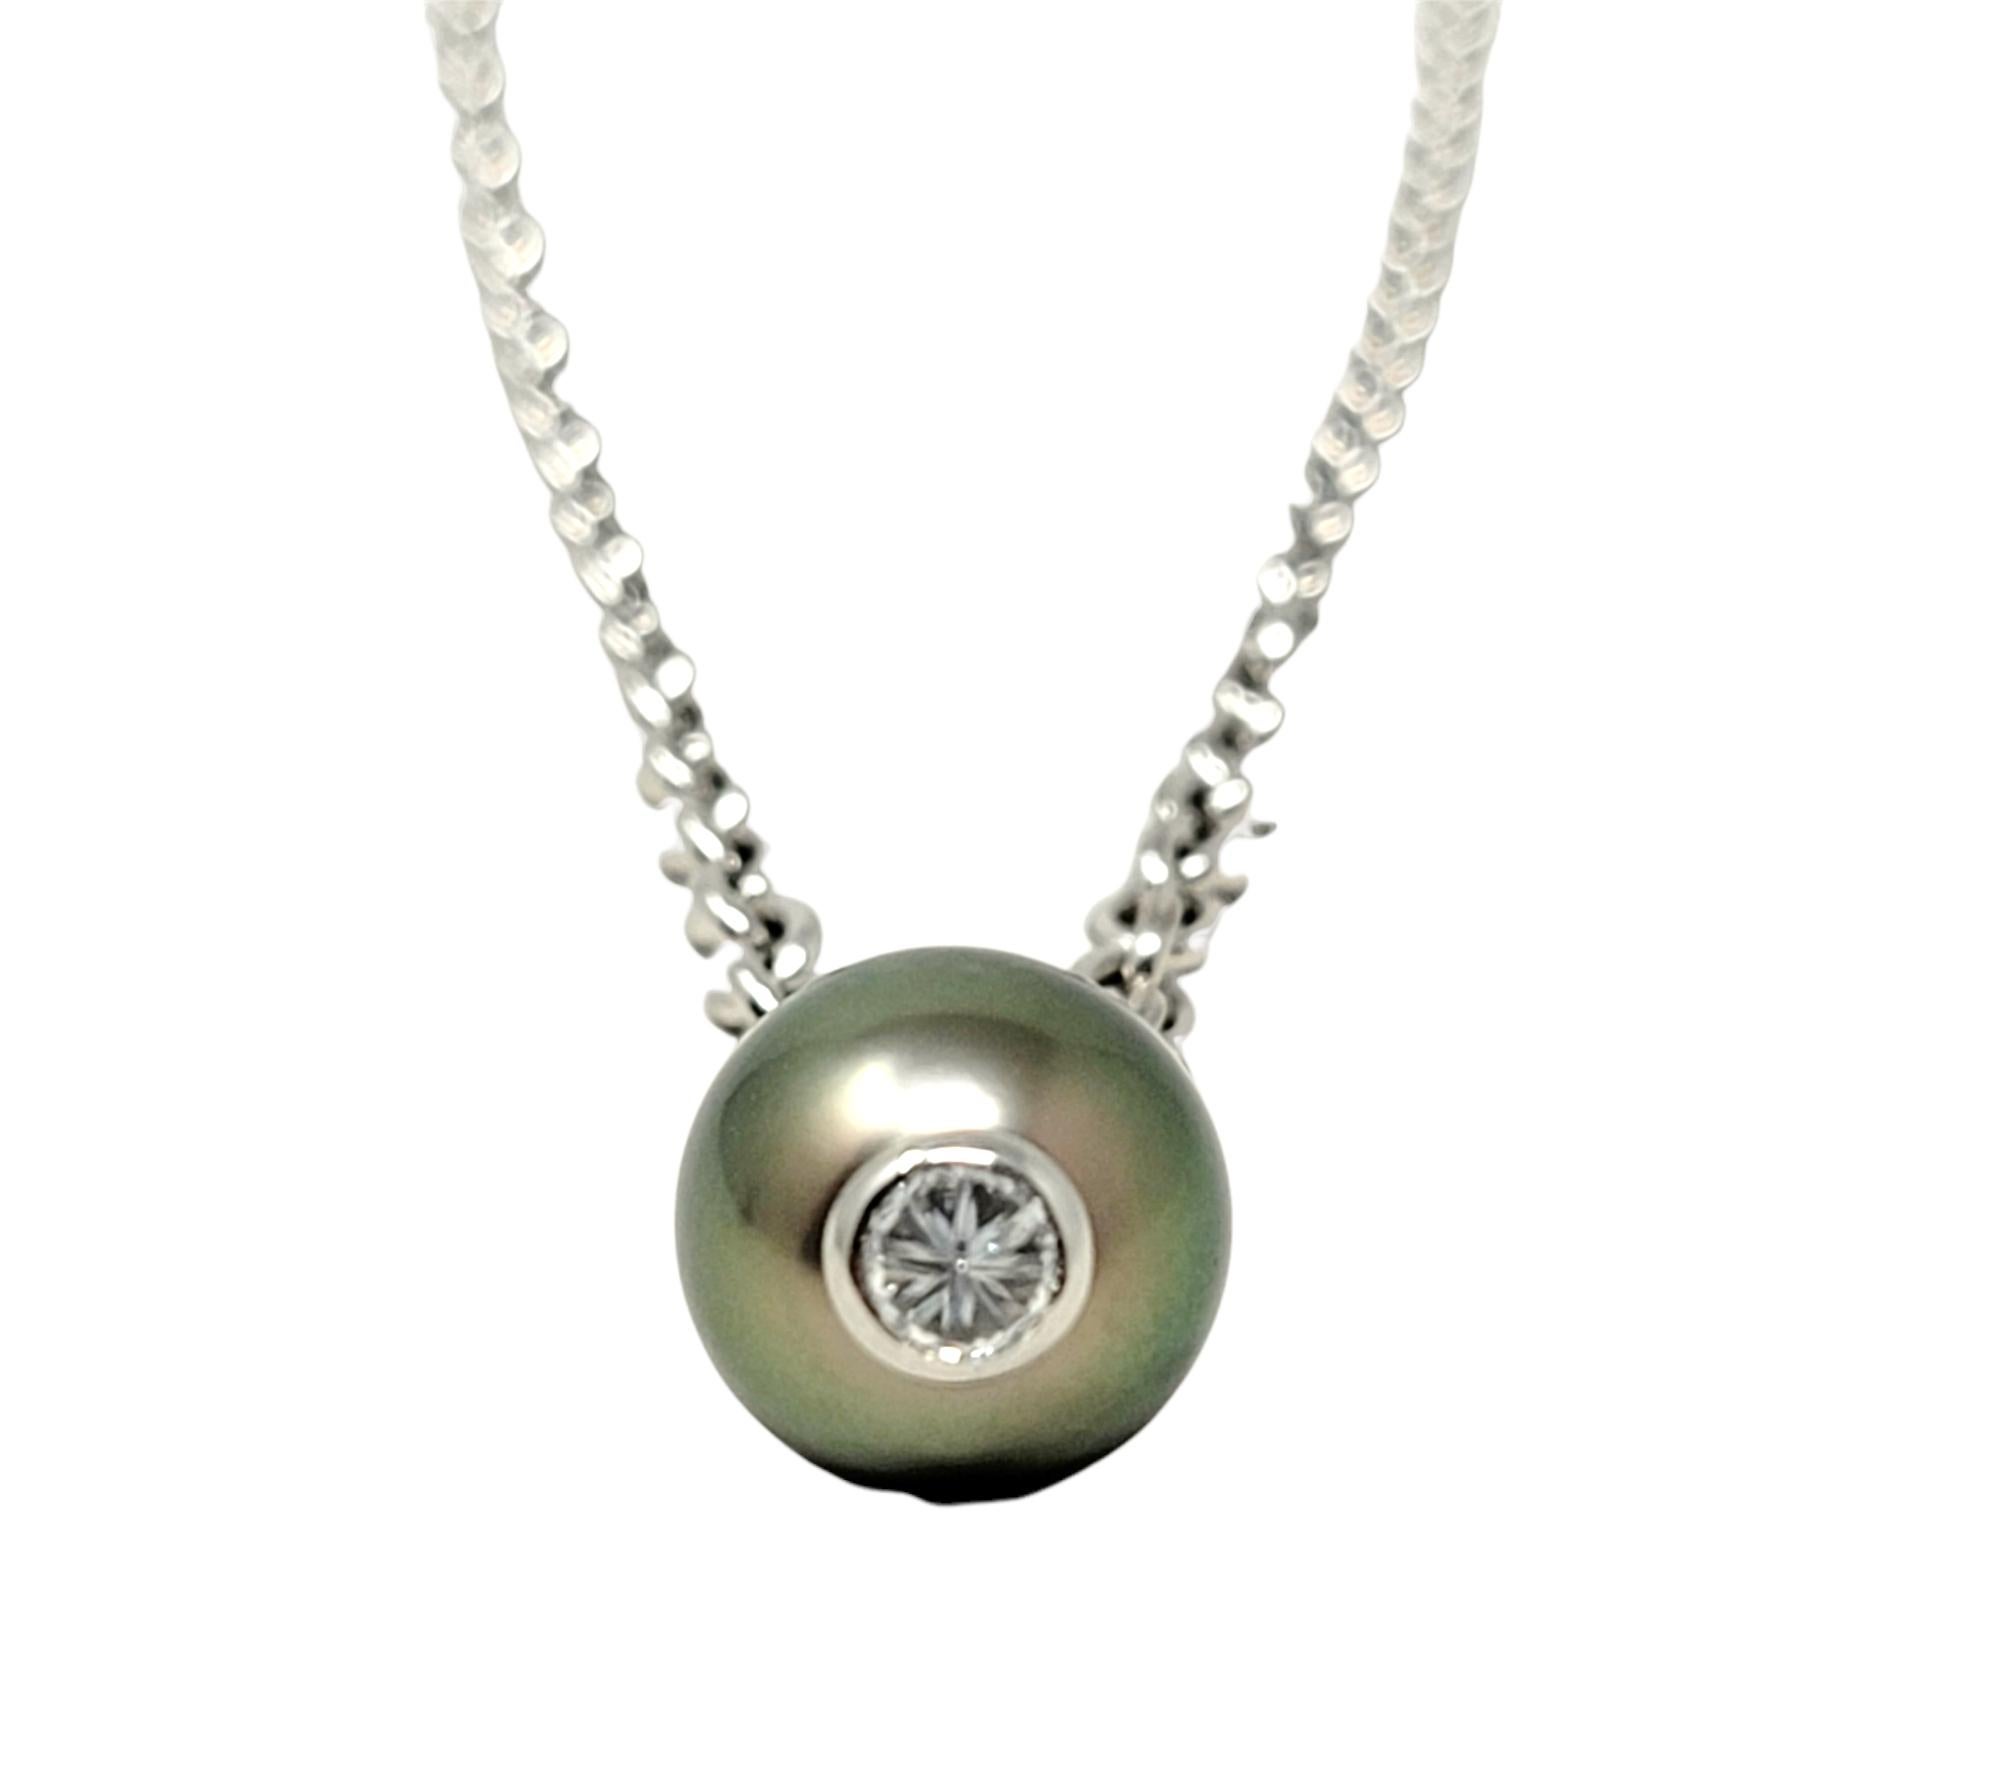 Contemporary Tiffany & Co. Diamond and Cultured Tahitian Pearl Pendant Necklace in White Gold